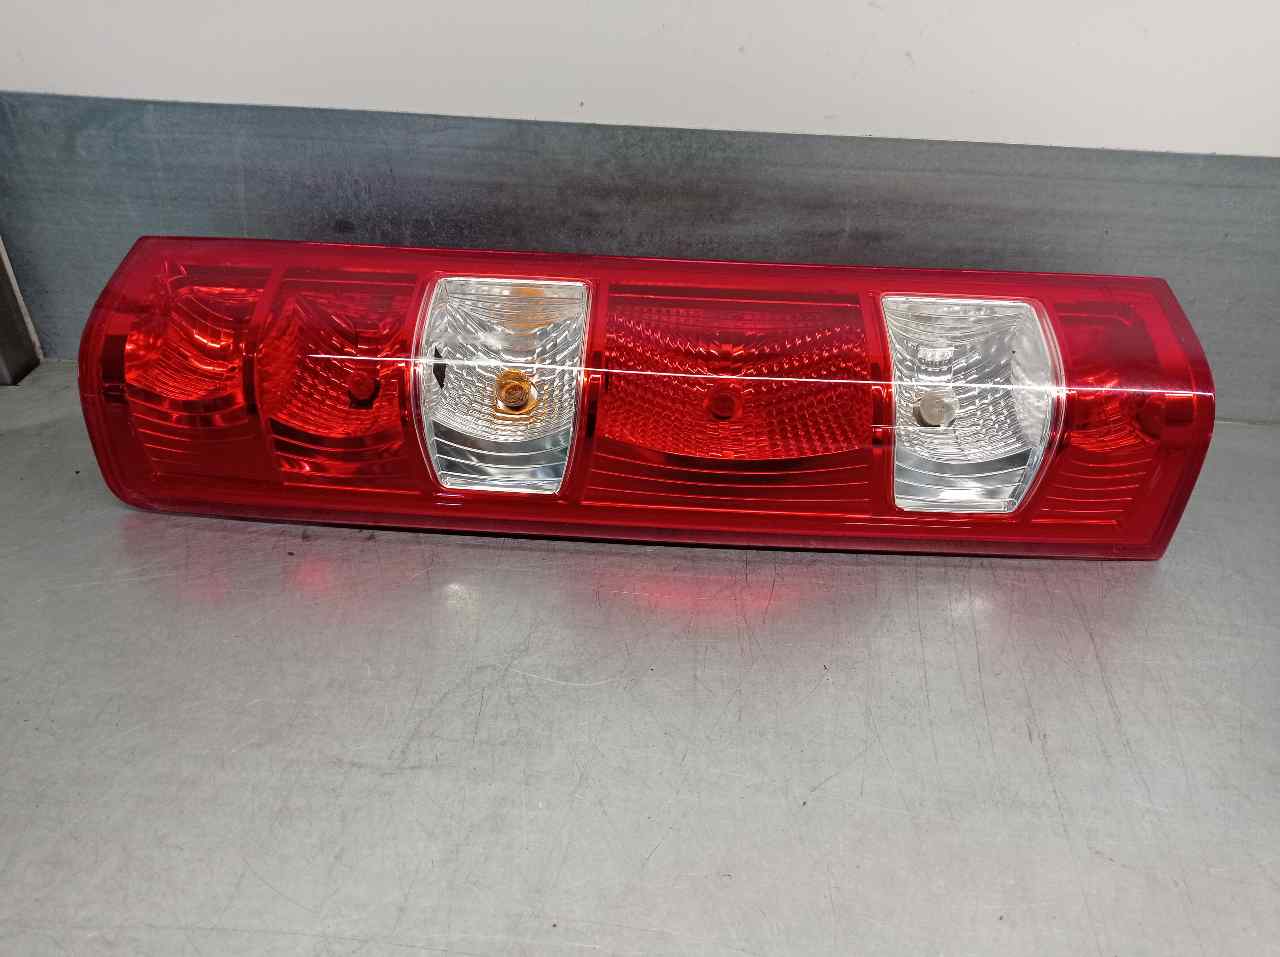 IVECO Daily 6 generation (2014-2019) Rear Left Taillight 69500591, 5PUERTAS 24139706